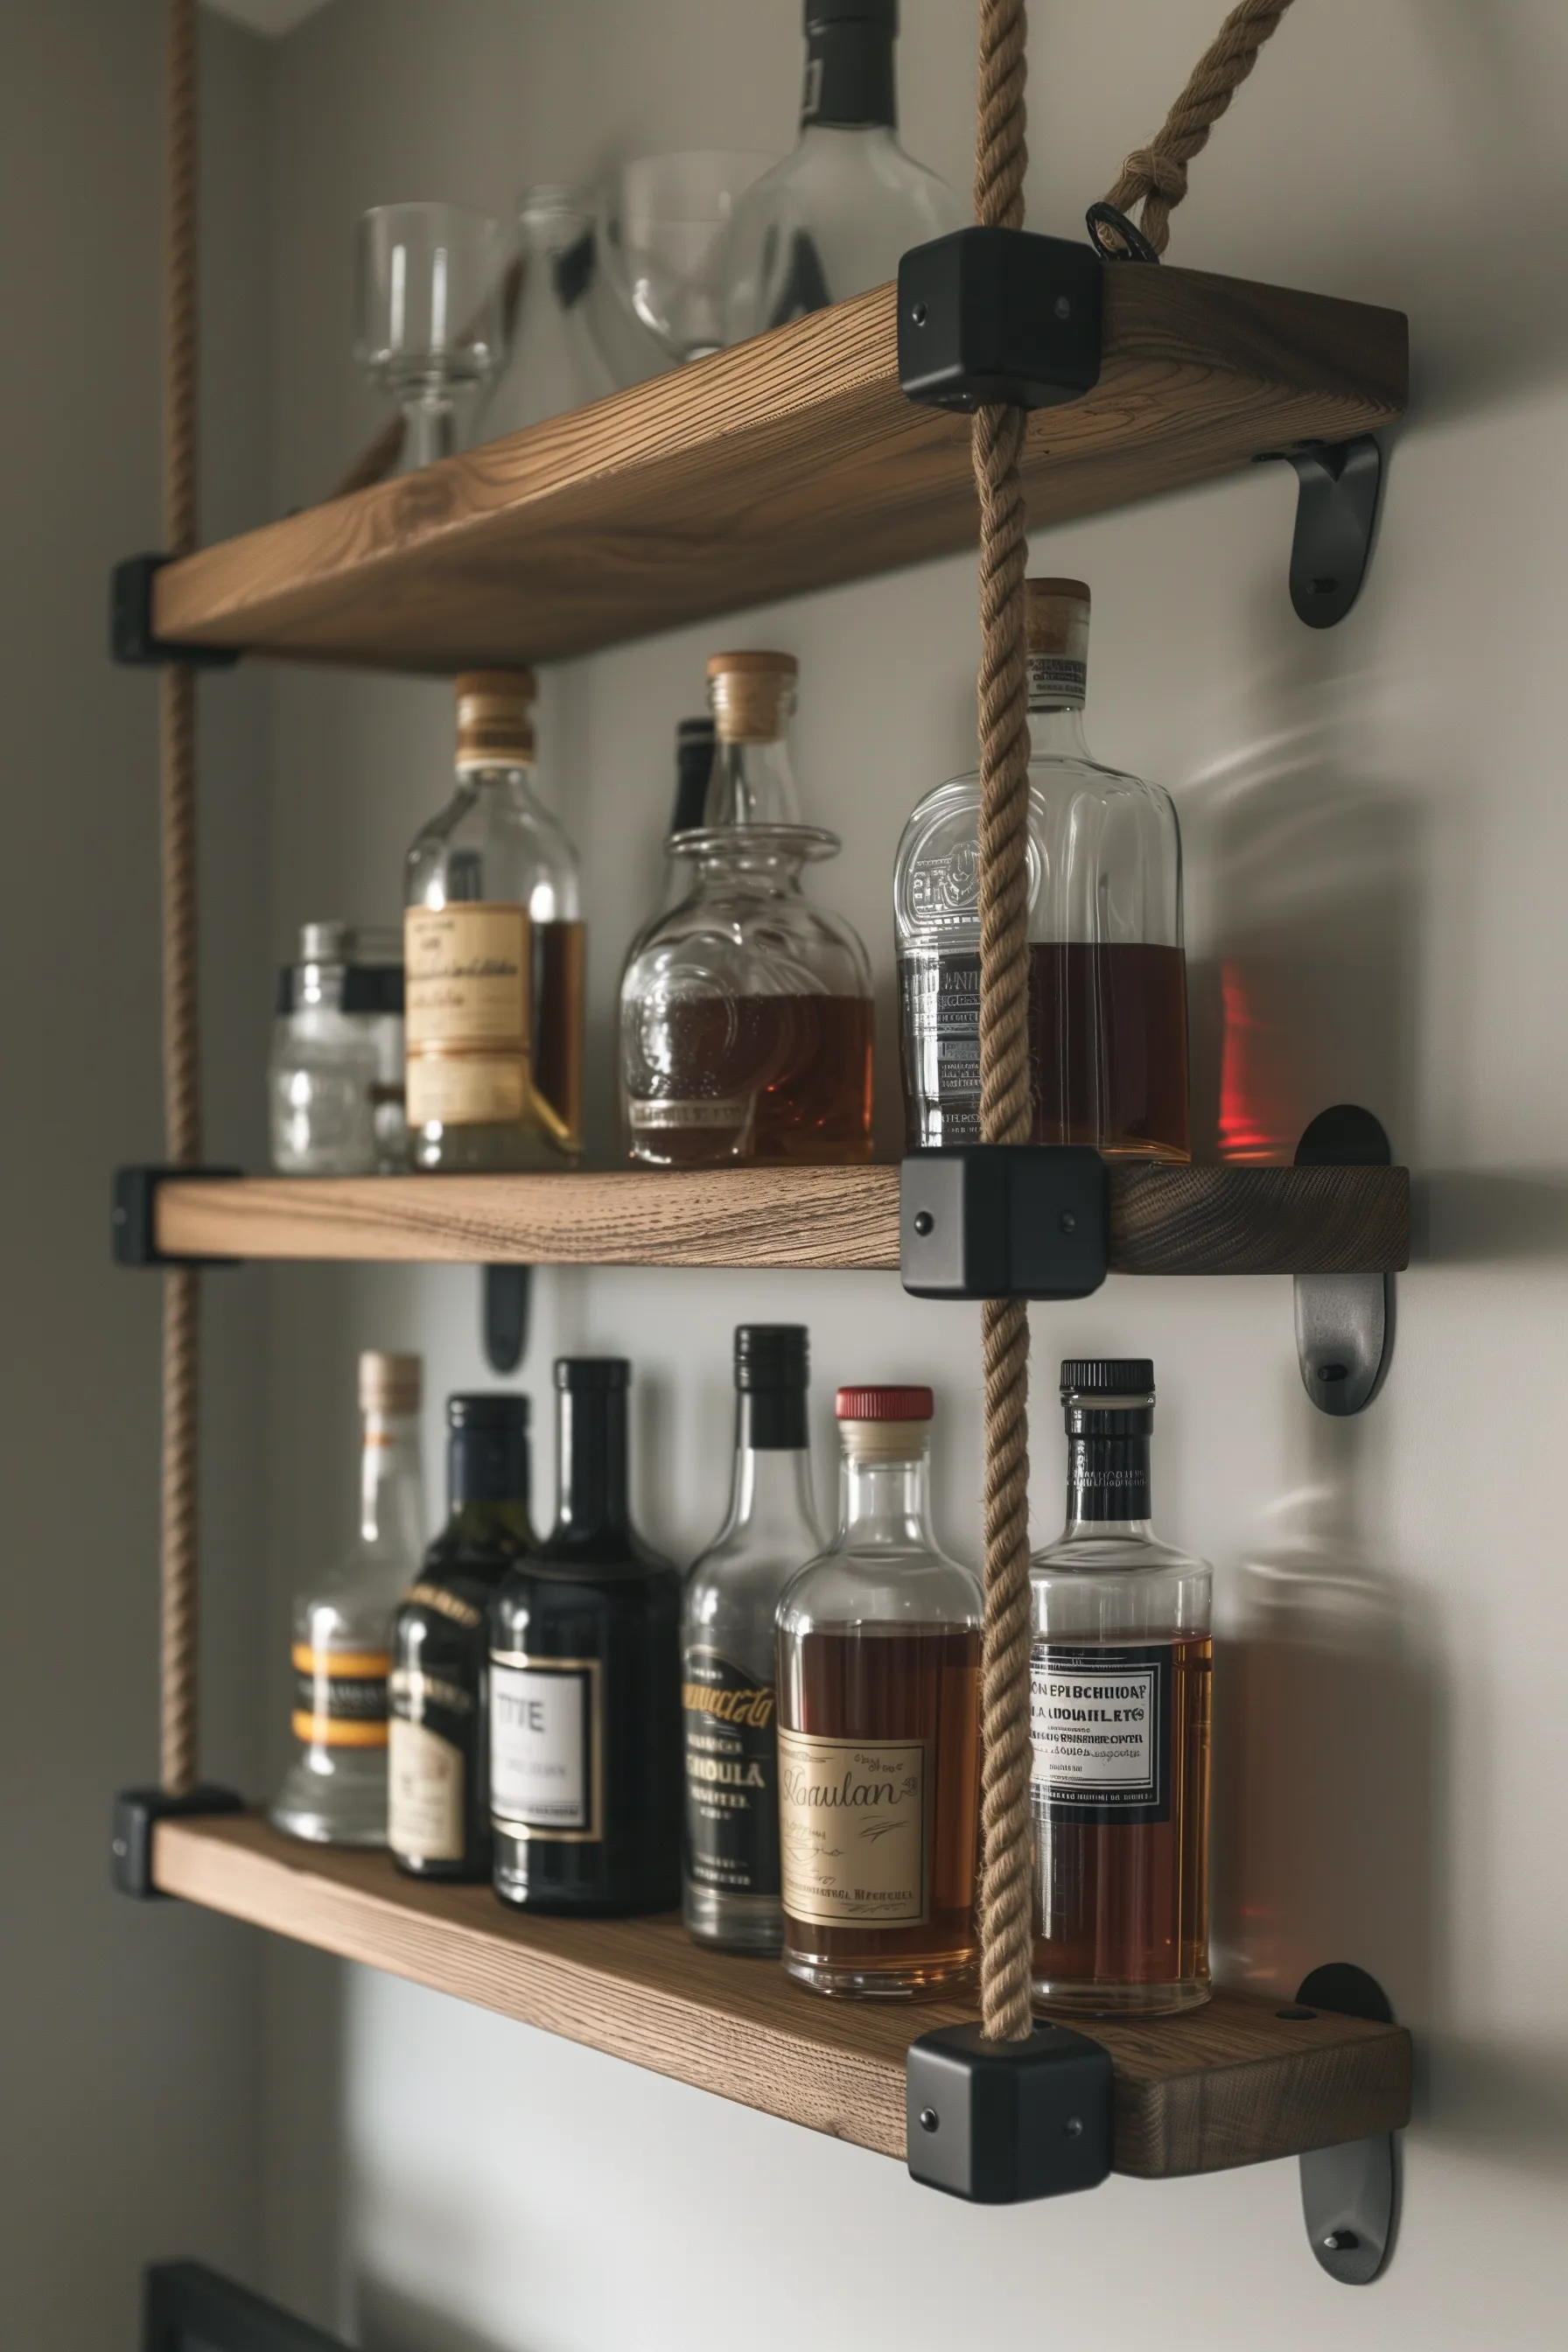 A floating ladder style bar shelf with rope